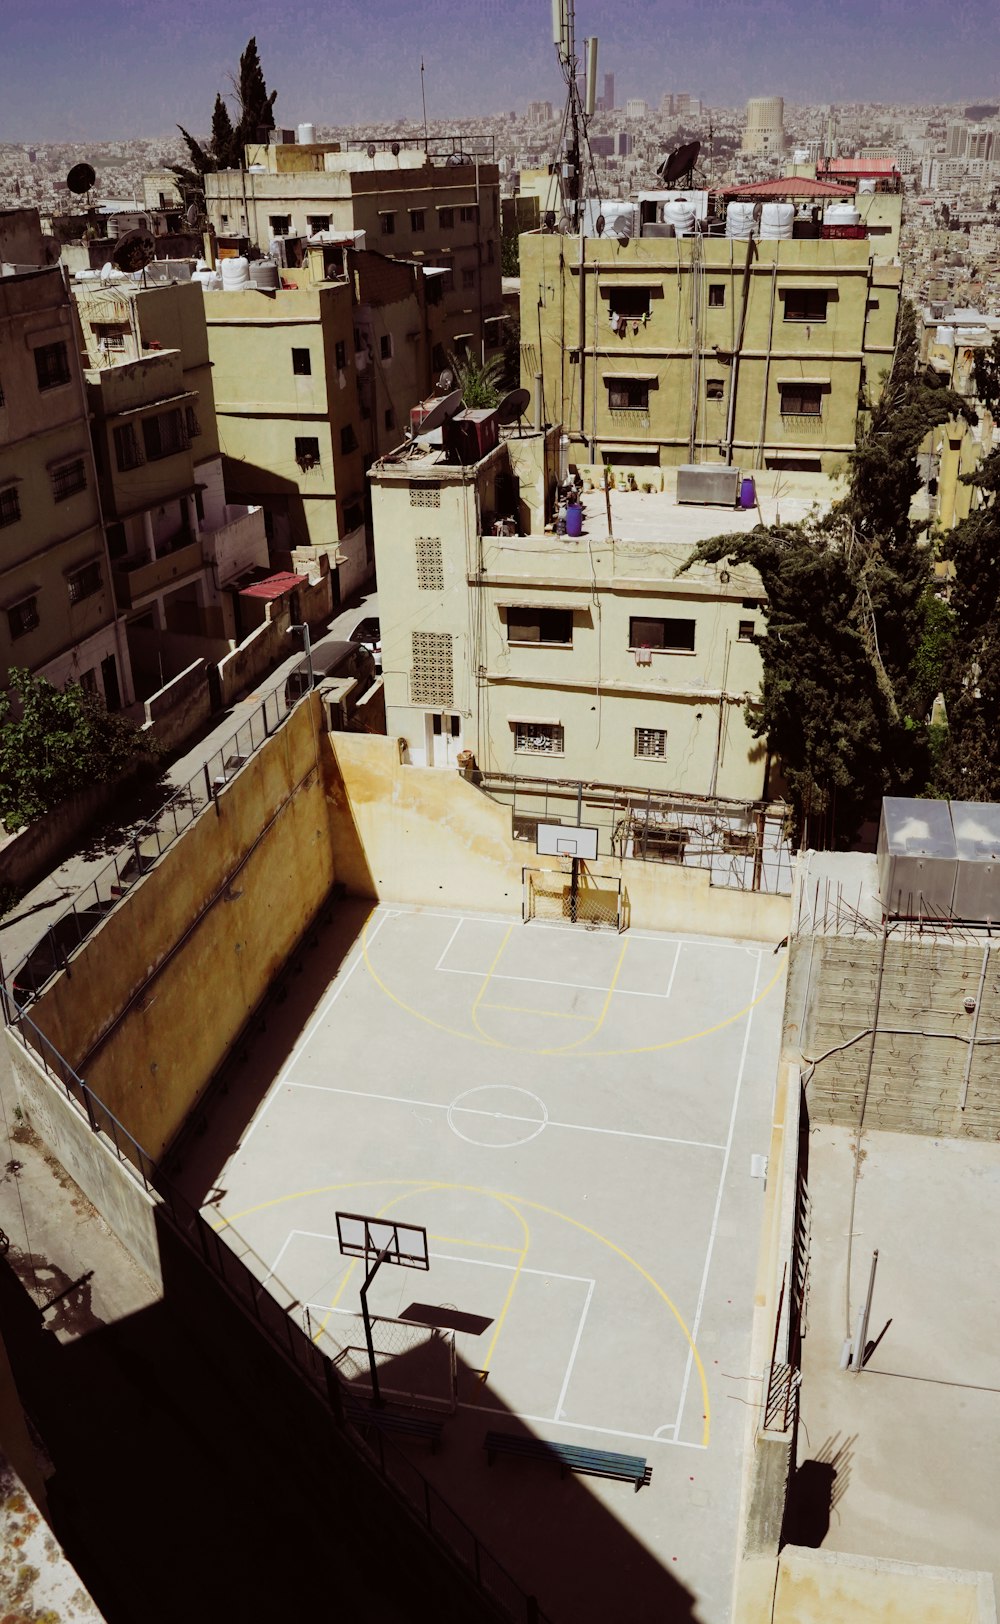 a group of buildings with a basketball court in the middle